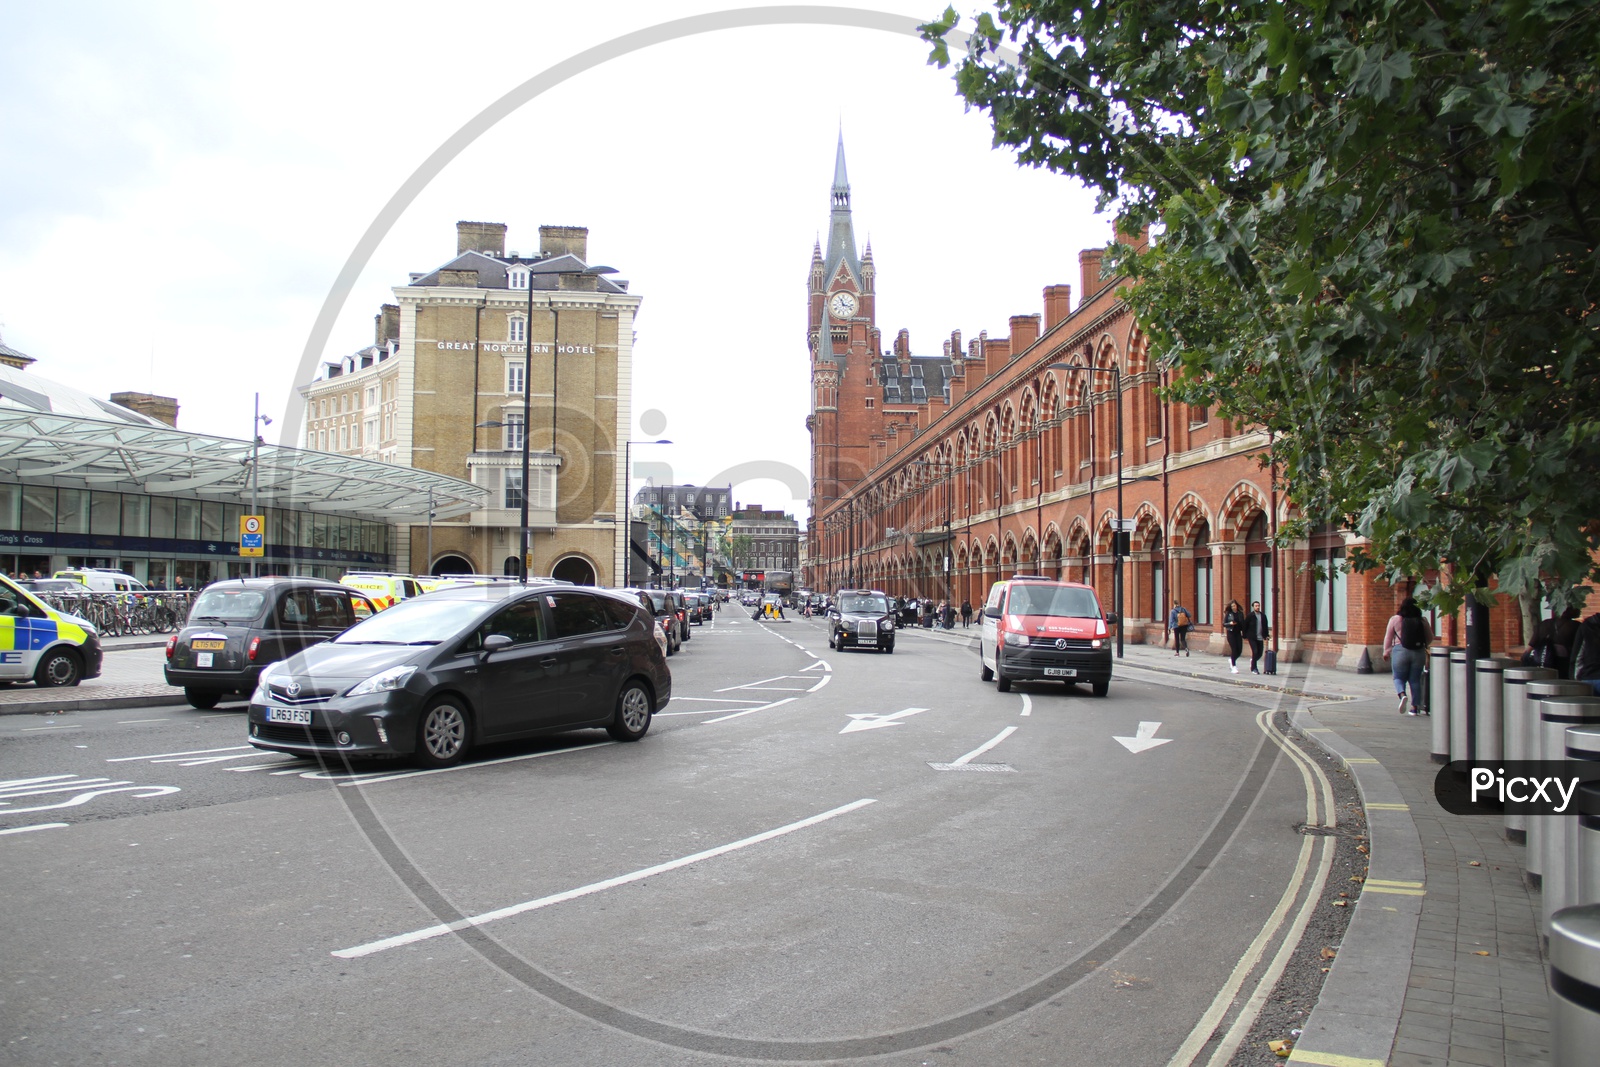 King's Cross underground Railway Station Road with Vehicles on Road